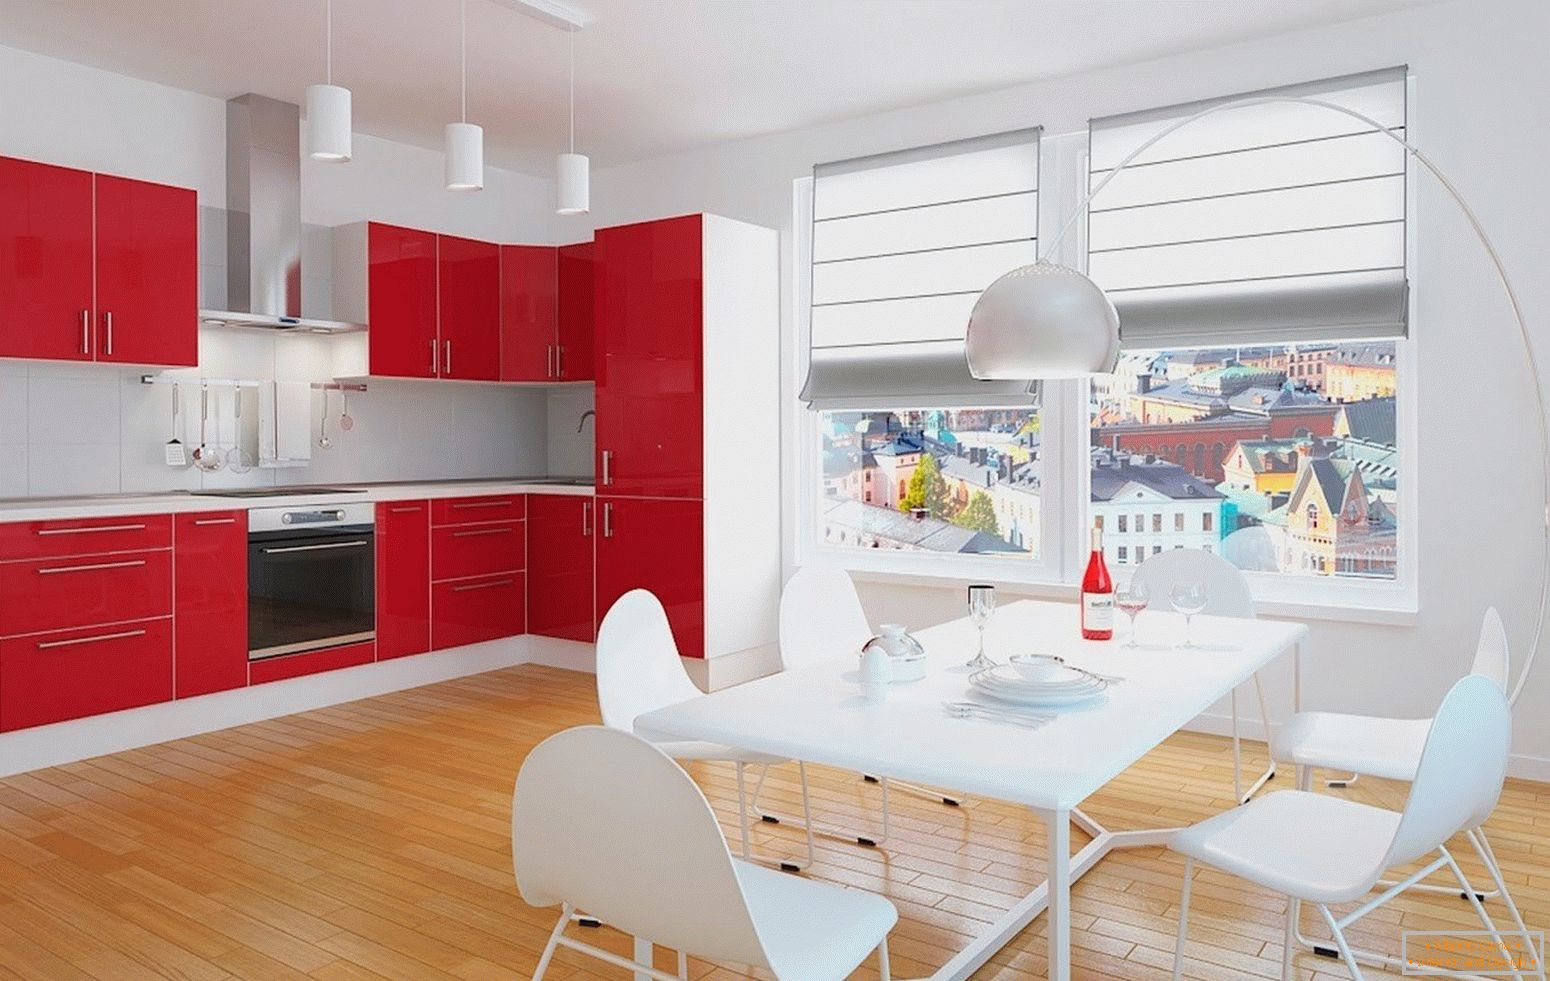 Red kitchen in the interior